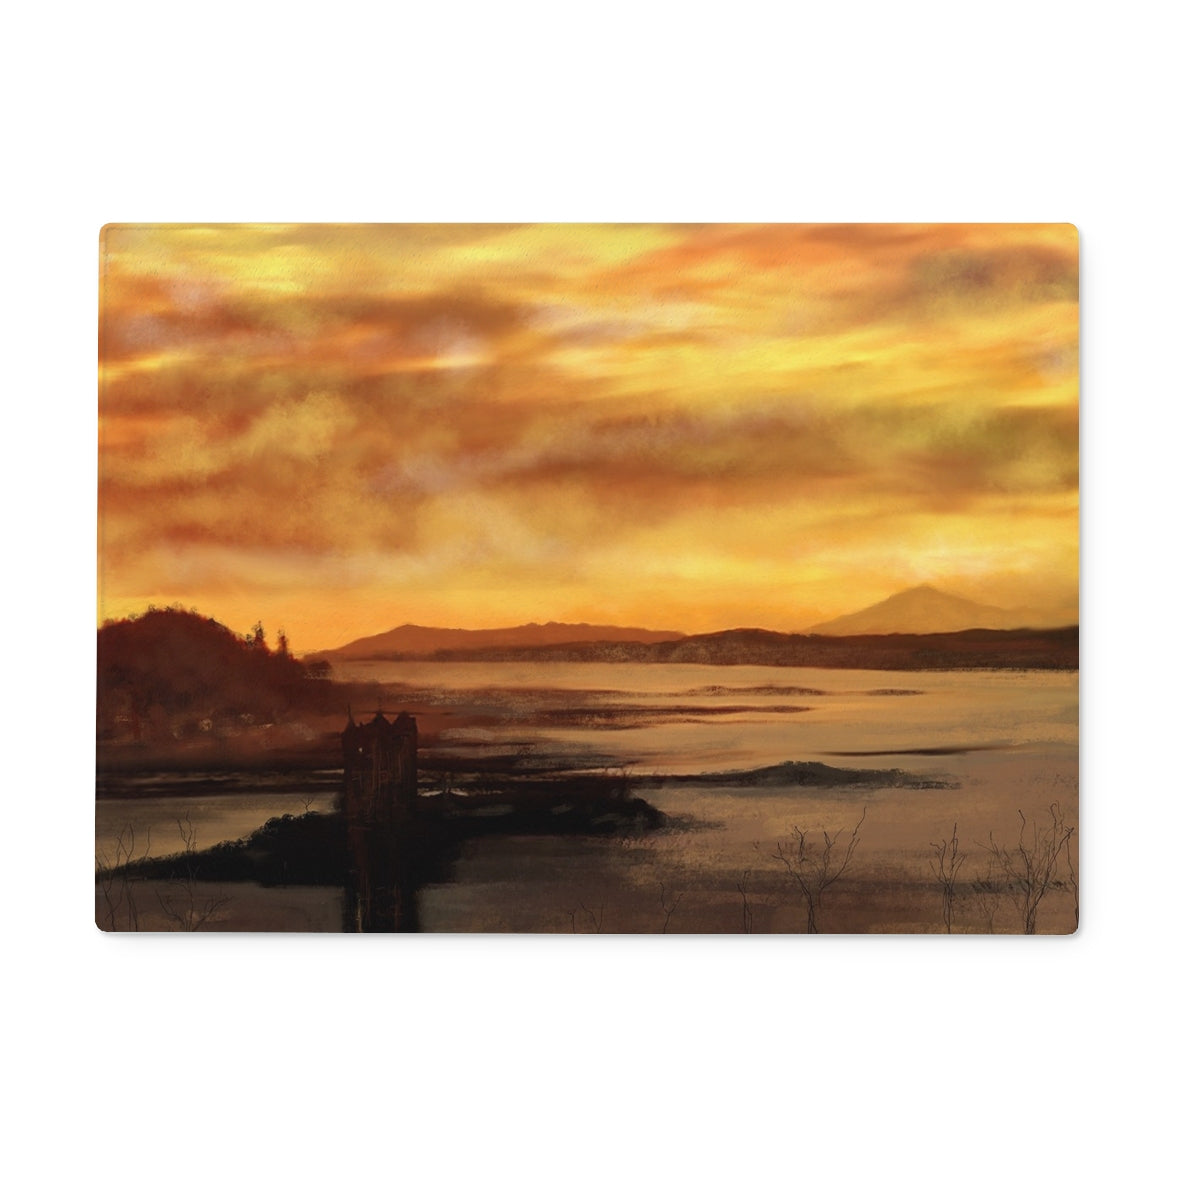 Castle Stalker Dusk Art Gifts Glass Chopping Board-Glass Chopping Boards-Historic & Iconic Scotland Art Gallery-15"x11" Rectangular-Paintings, Prints, Homeware, Art Gifts From Scotland By Scottish Artist Kevin Hunter